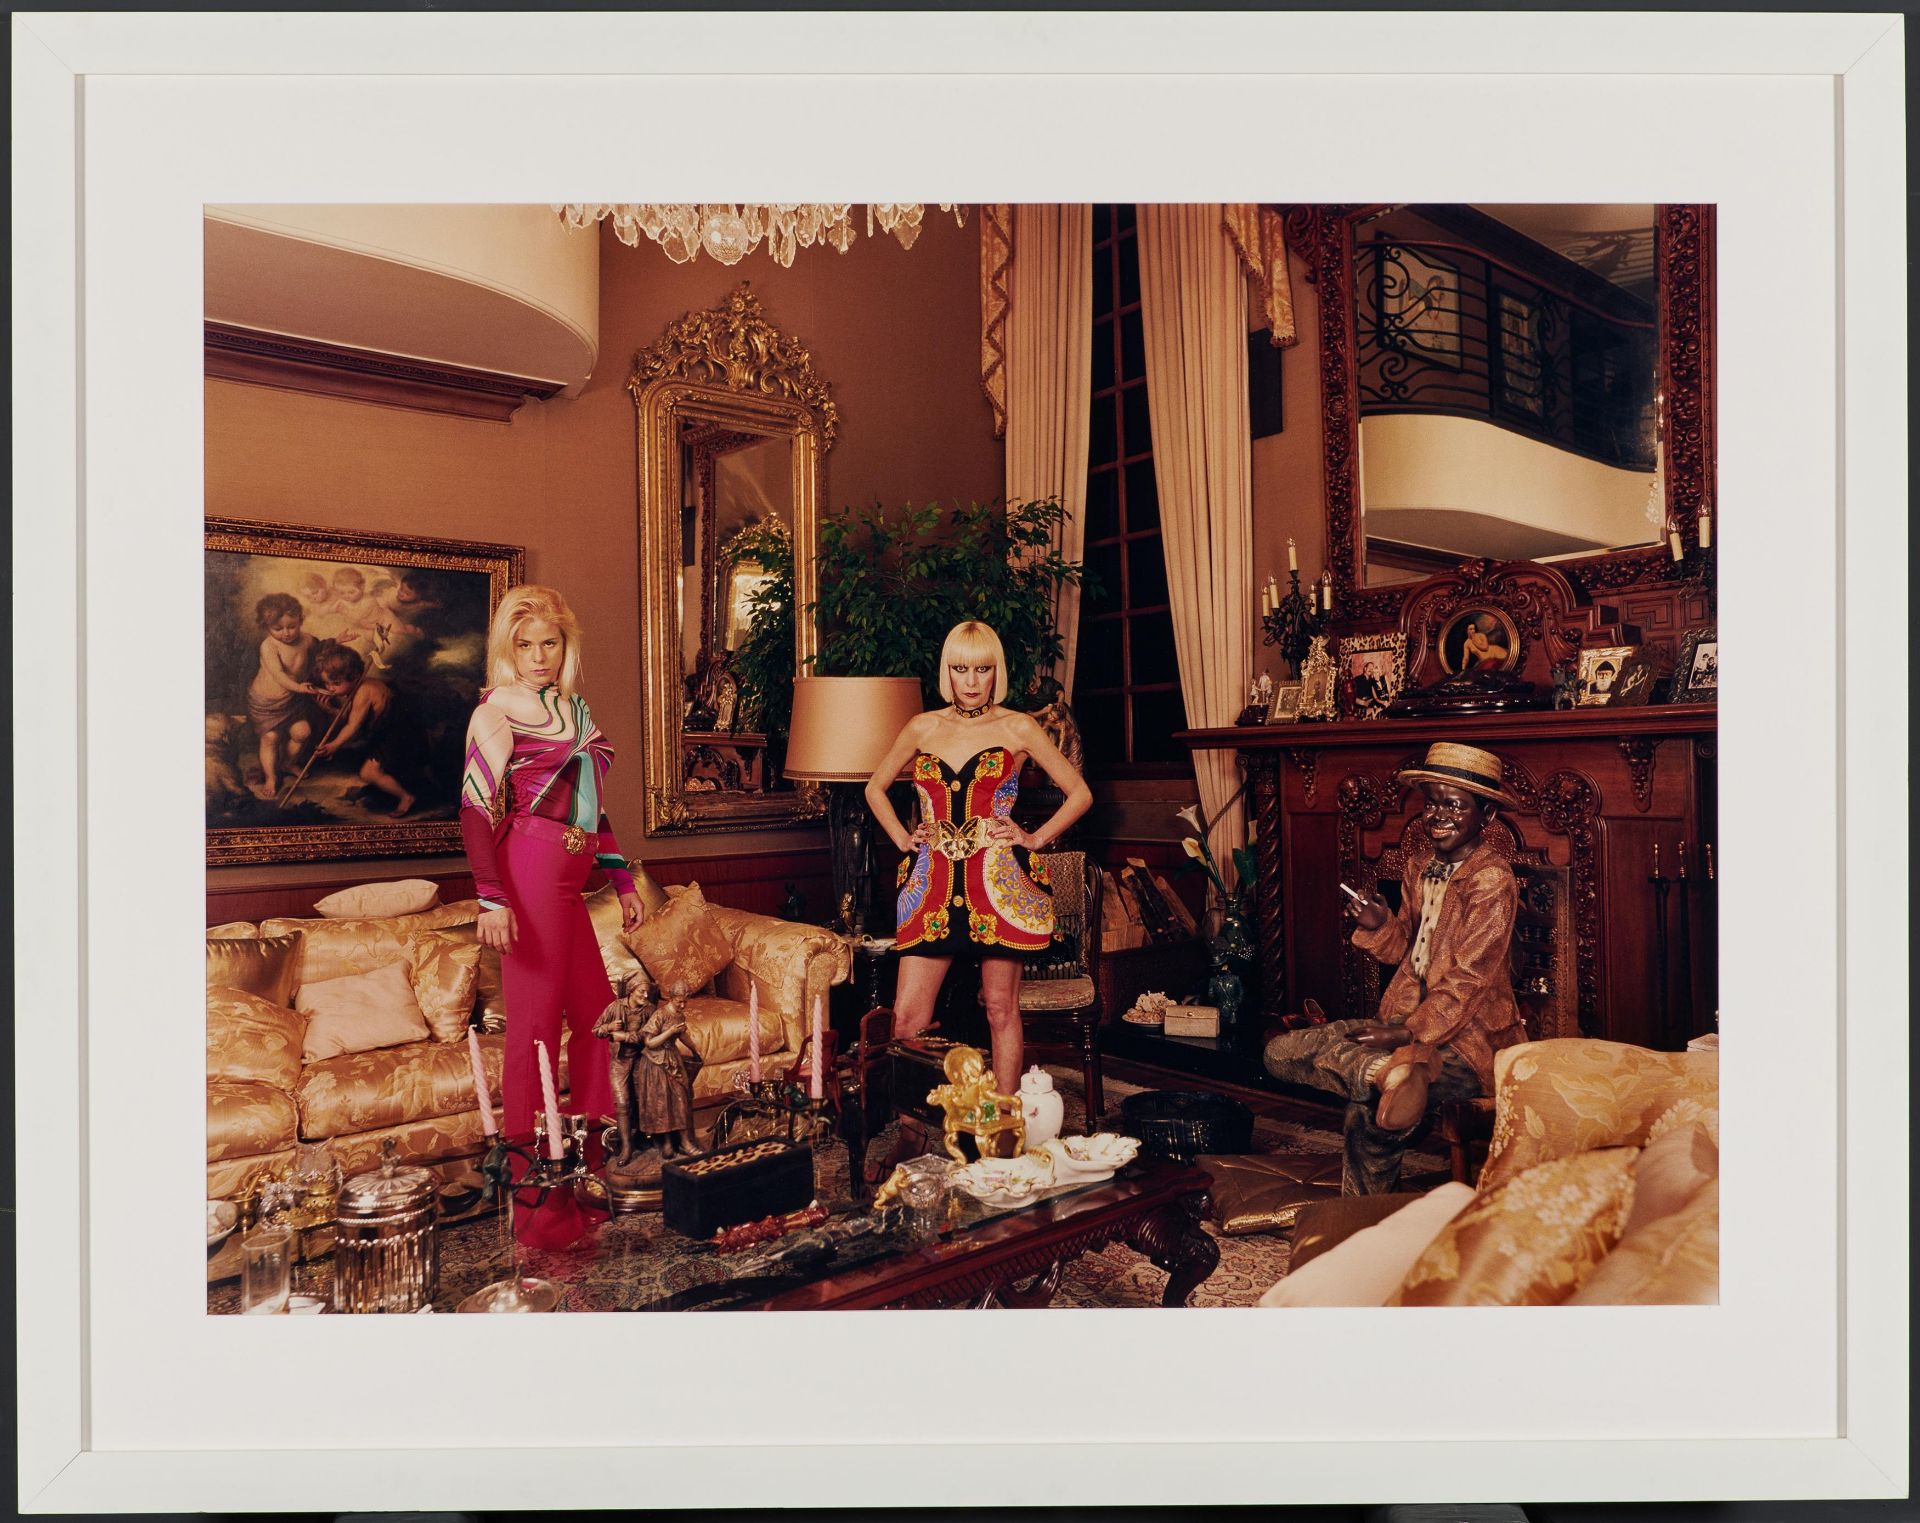 Daniela Rossell: Untitled (Inge and her mother Emma in living room, Mexico City) - Image 2 of 3